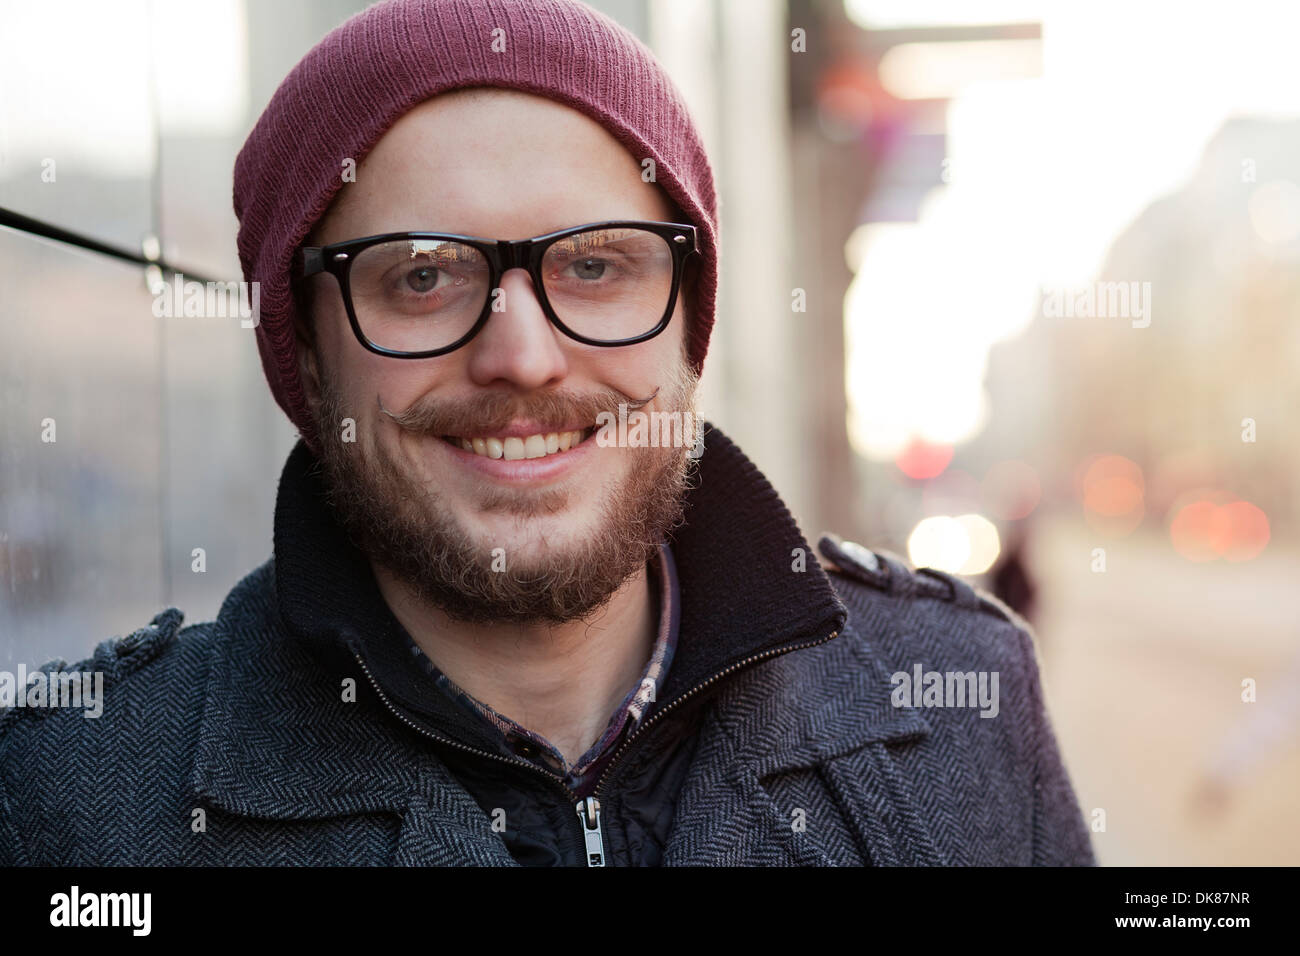 Young smiling hipster with moustache, beard and glasses Stock Photo